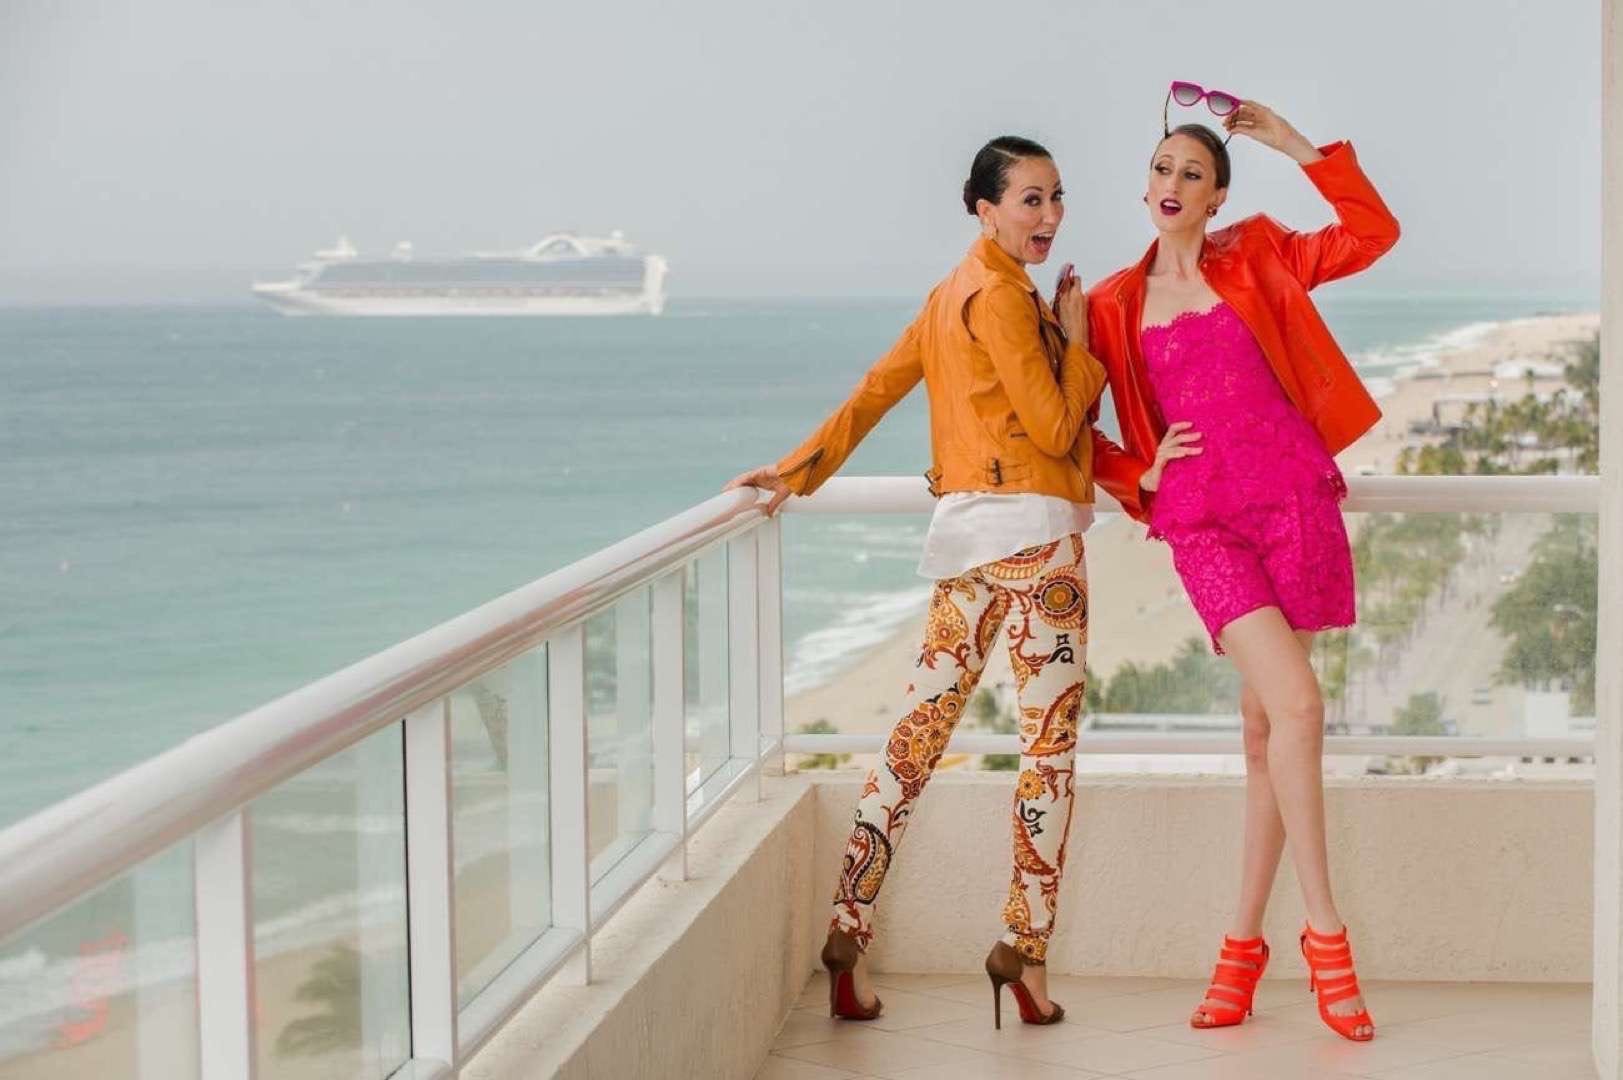 Las Olas Magazine Pat and Anna Cleveland Two women in orange and hot pink outfits posing for camera on a balcony with a cruise ship in the background